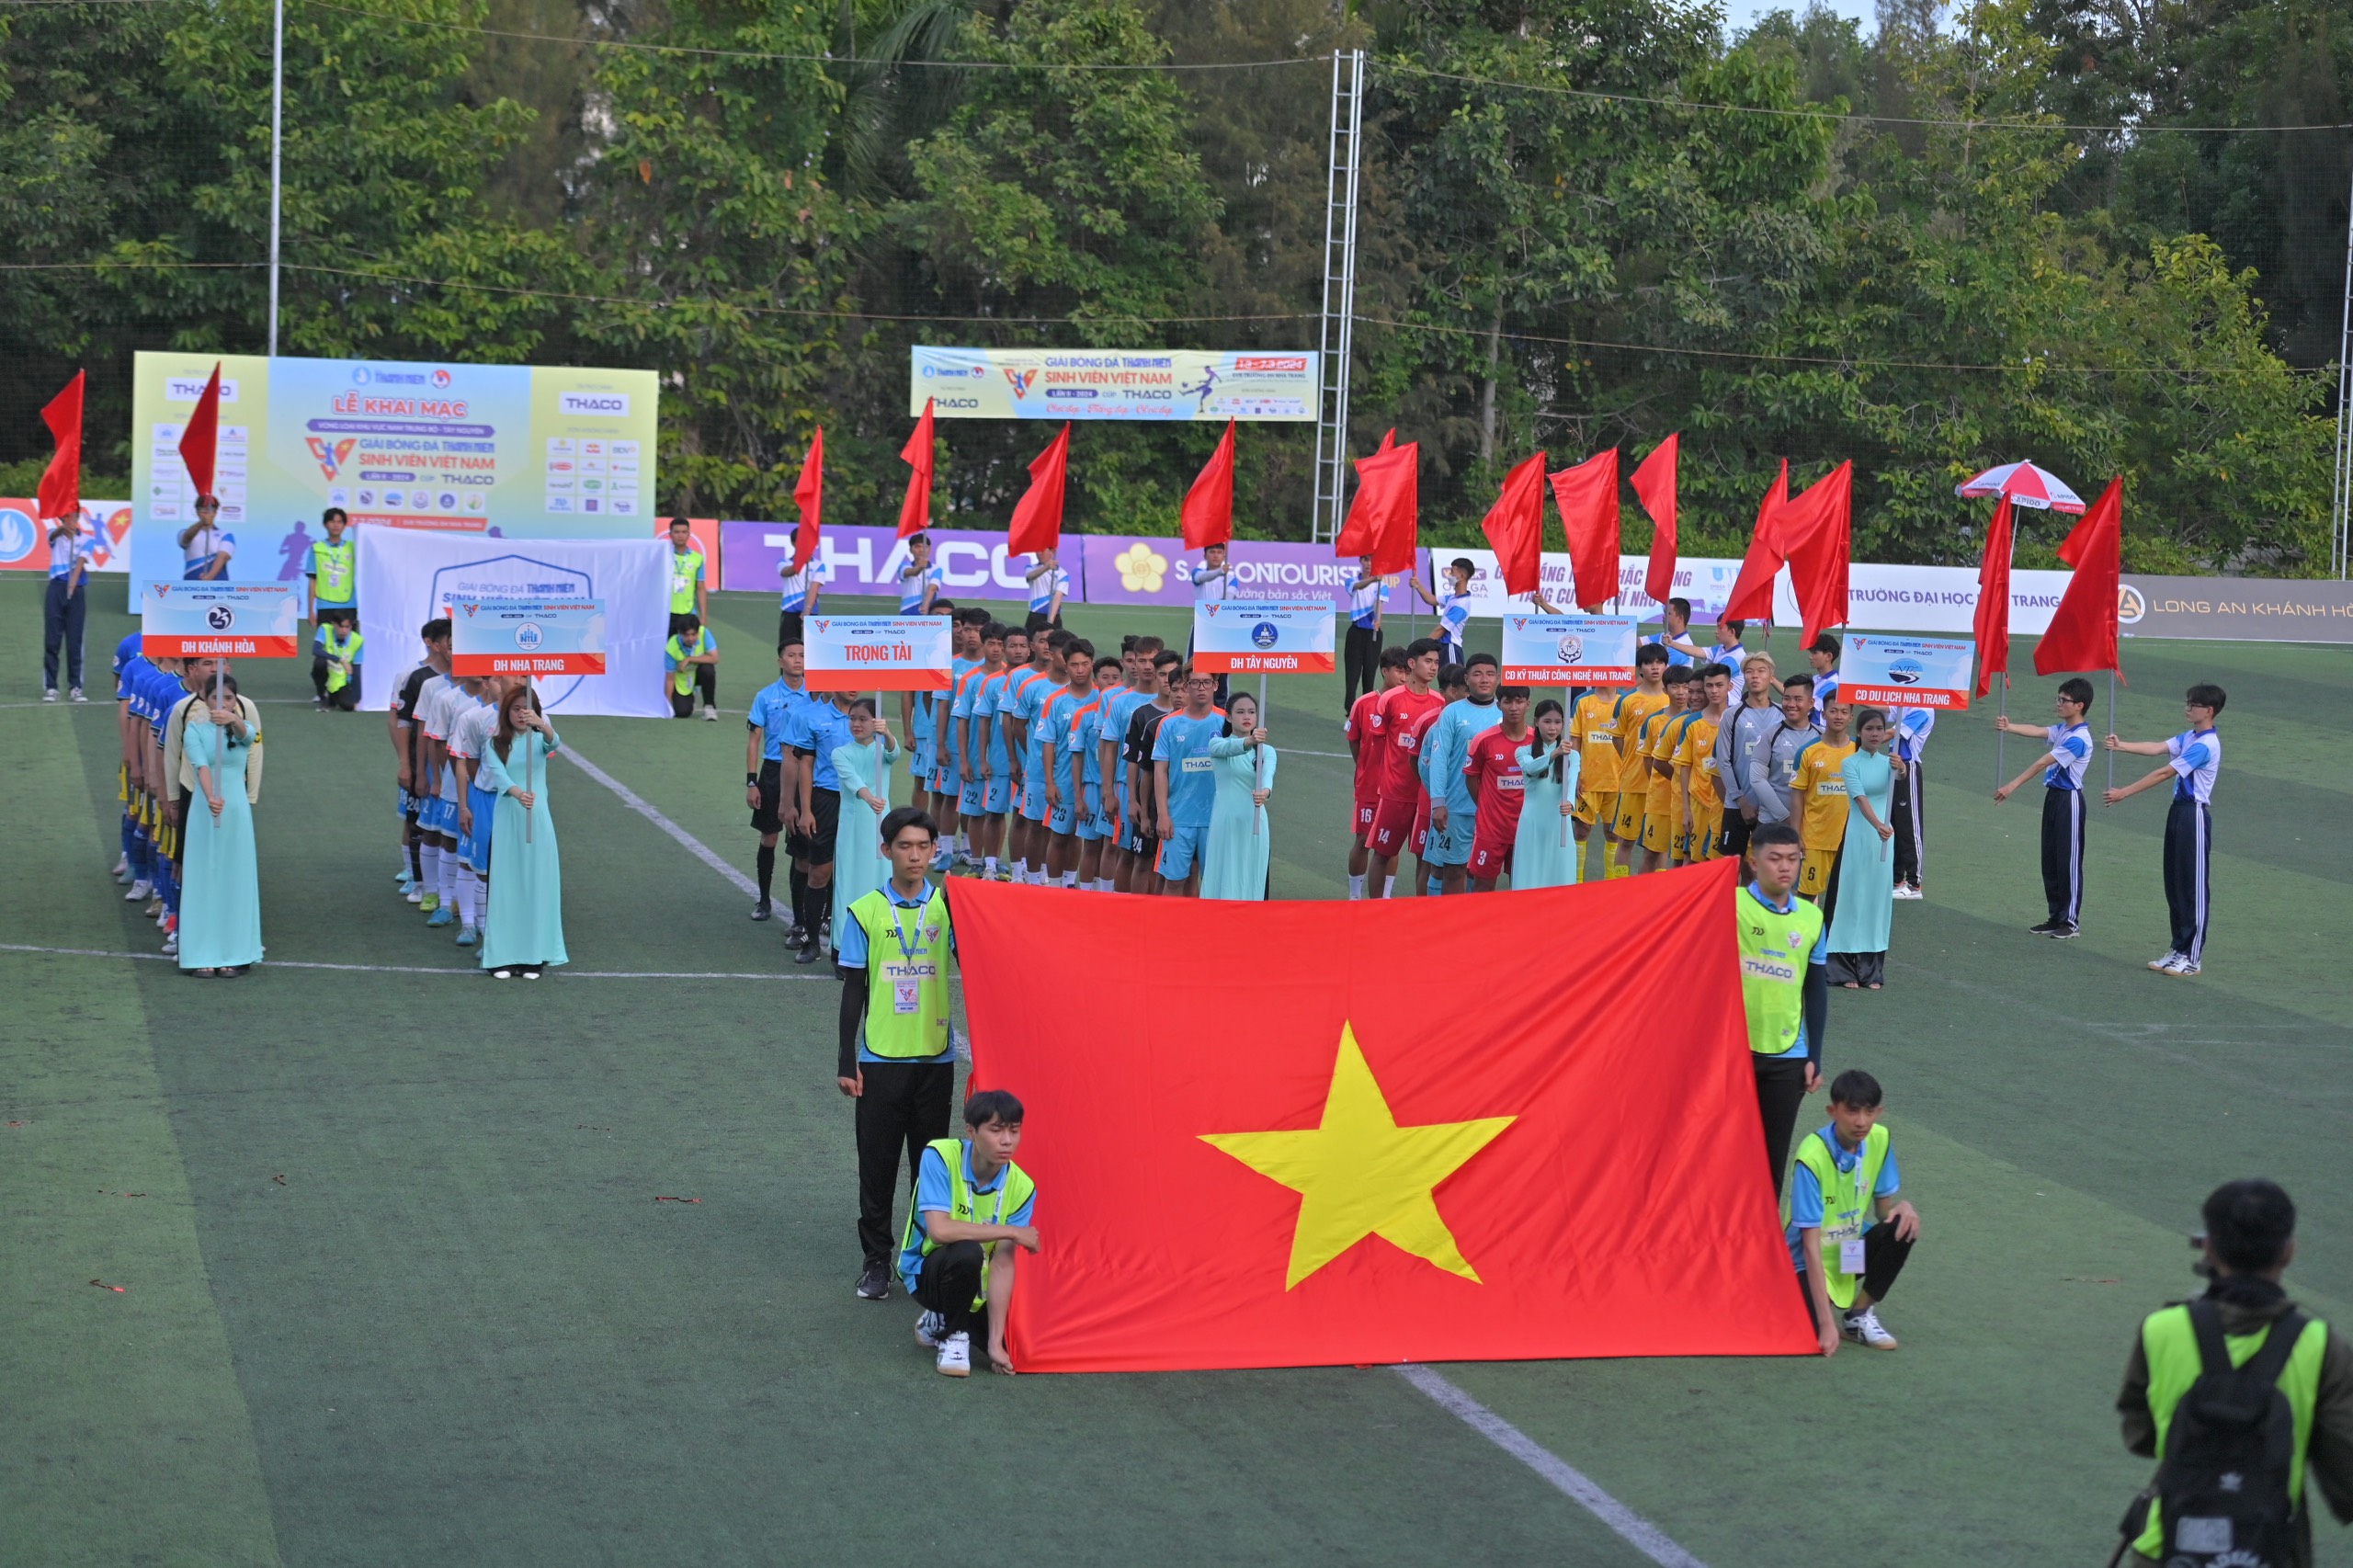 Southern central and highland regional preliminary of Thanh Nien football tournament 2024 –THACO Cup for Vietnamese students played by 6 teams